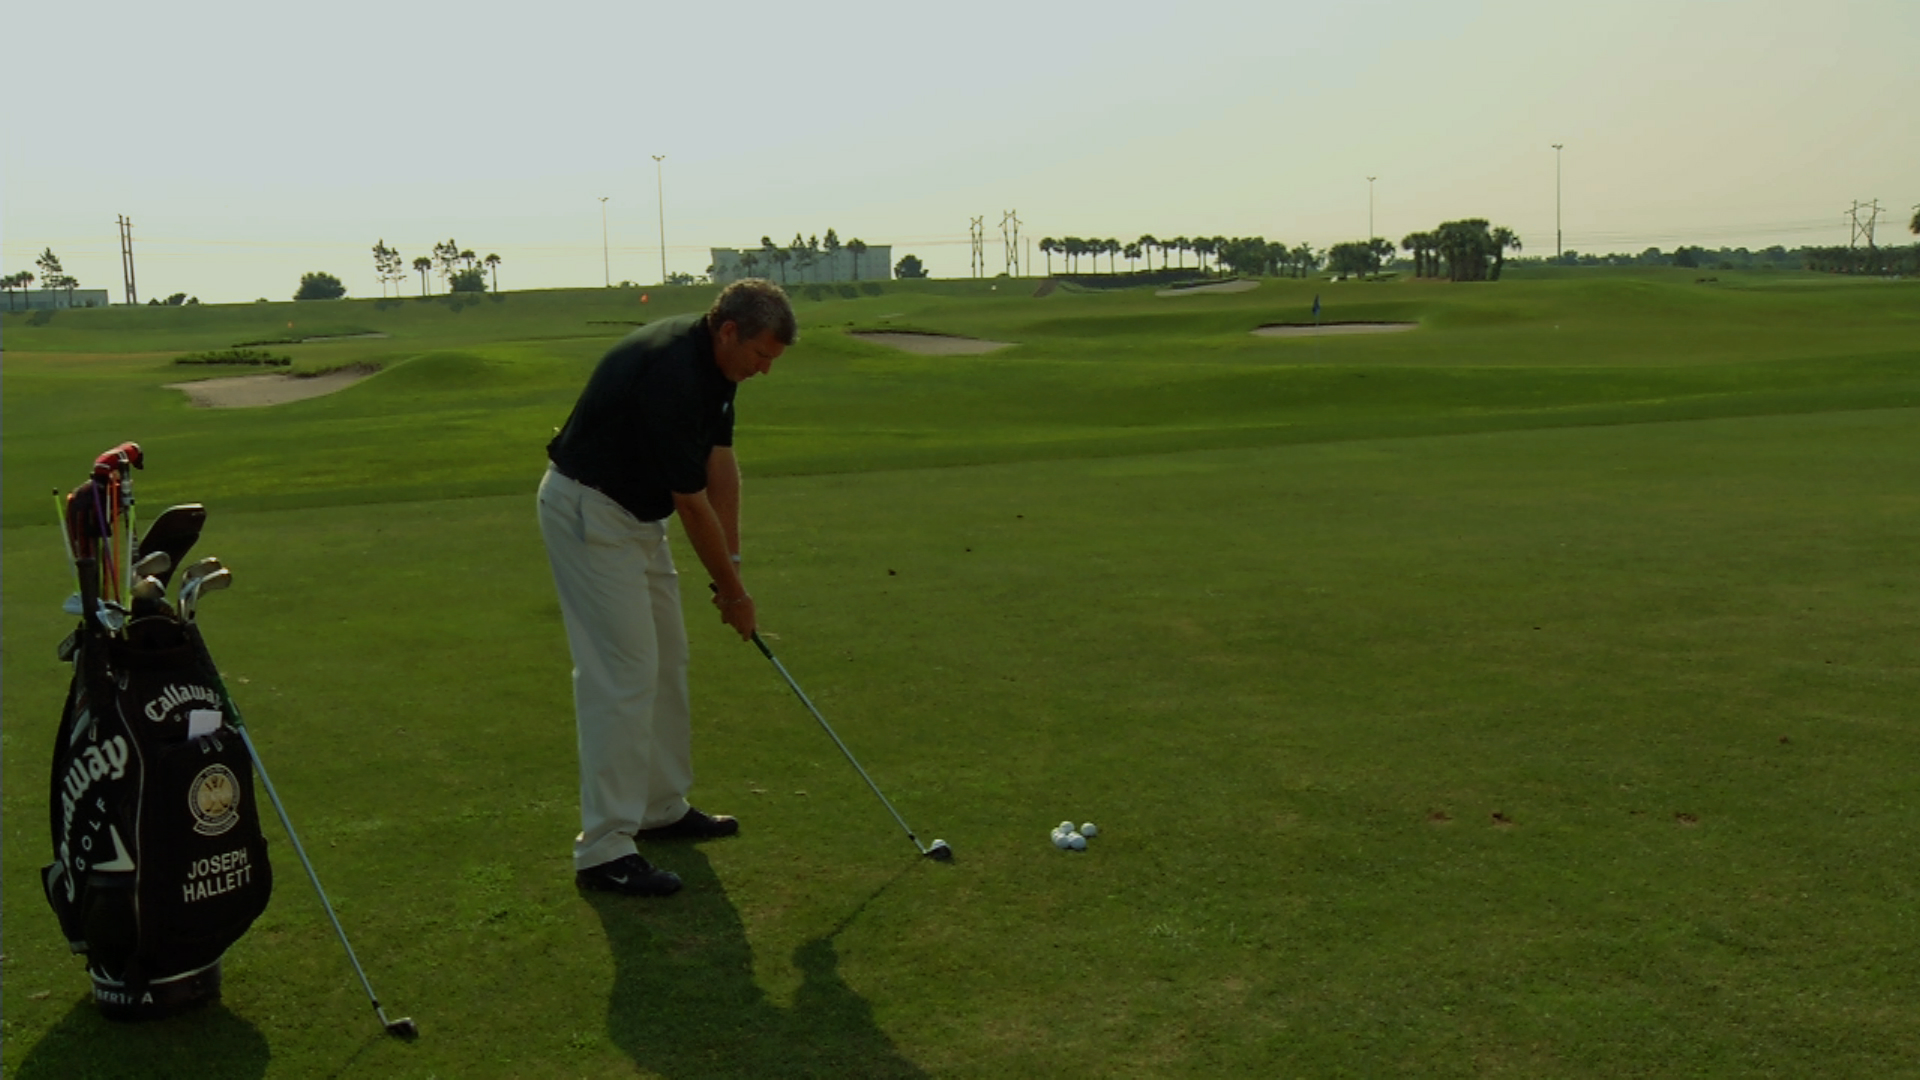 Creative Golf Practice Drills: Let the Cards Call Your Shot